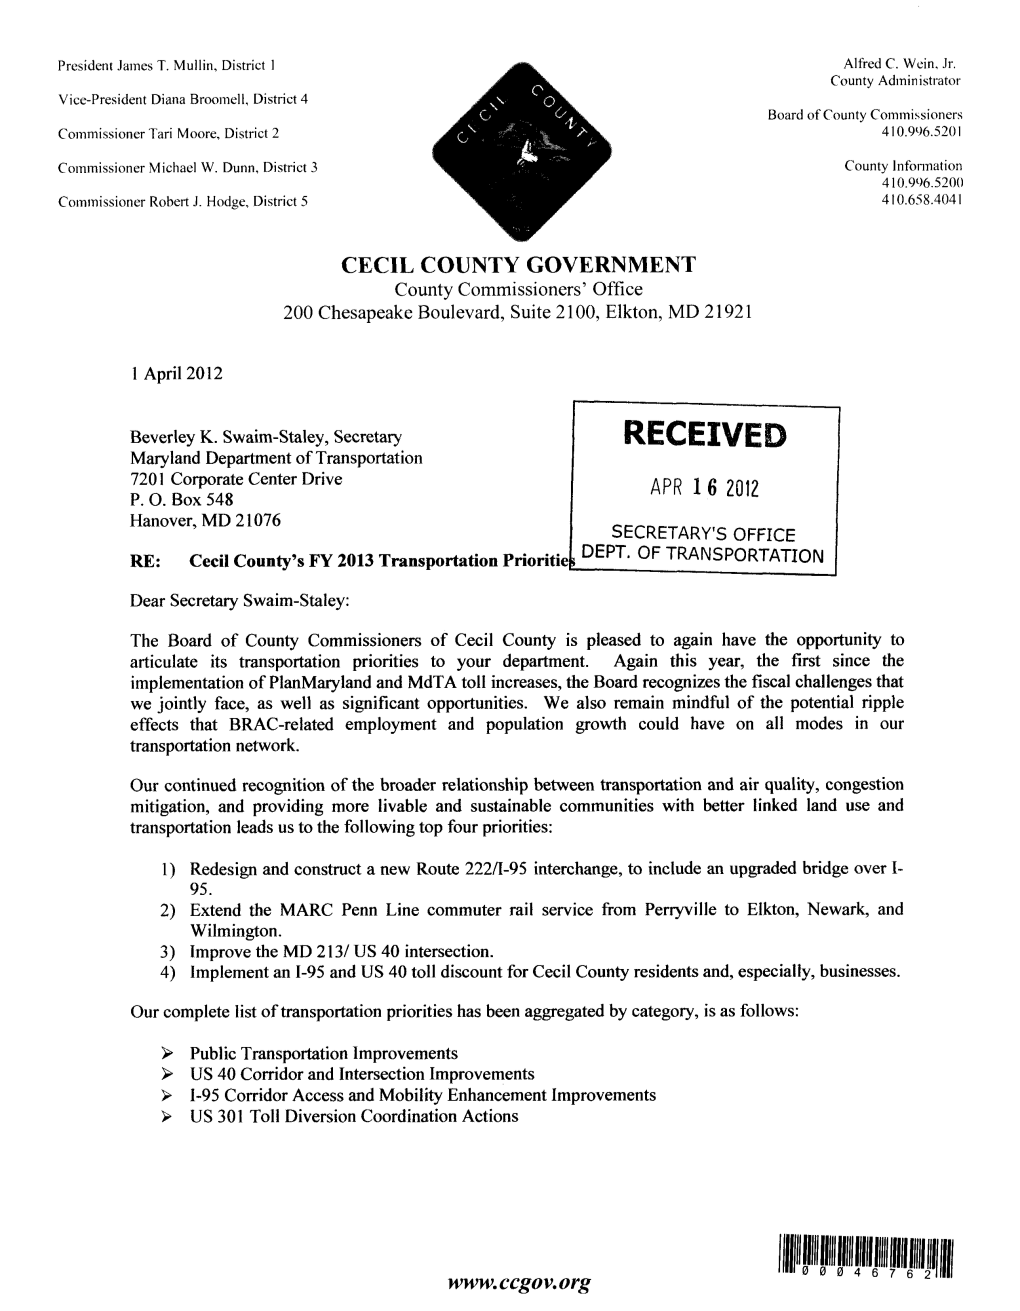 2012 Cecil County Priority Letter